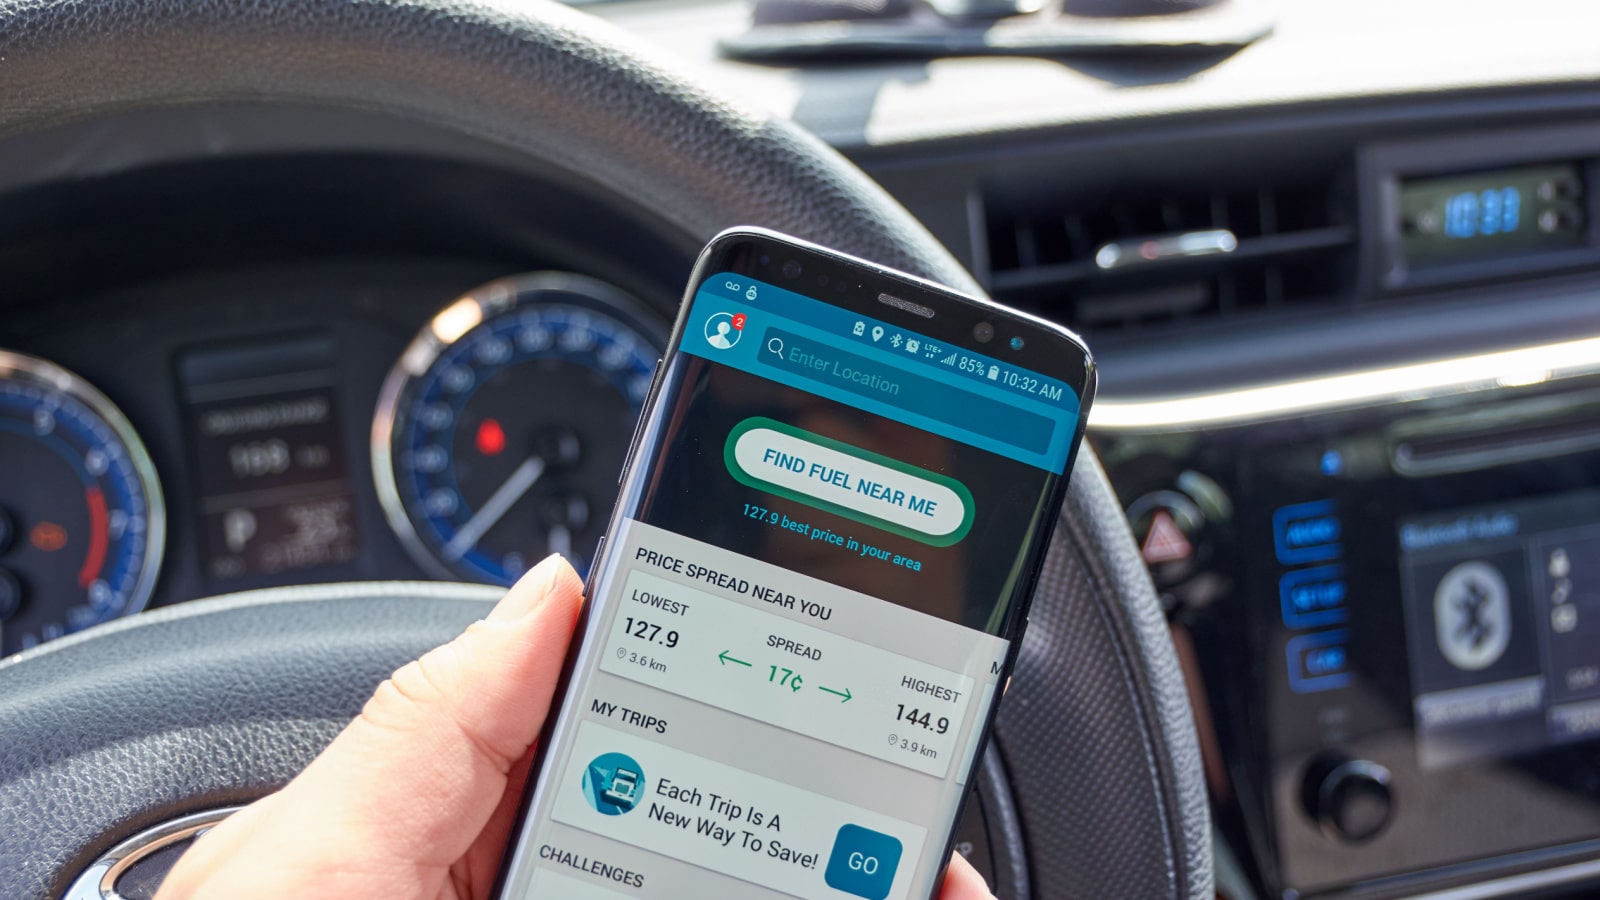 TORONTO, CANADA - JULY 15, 2018: GasBuddy mobile app on s8 screen in a hand. GasBuddy is company that operates apps and websites based on finding real-time fuel prices